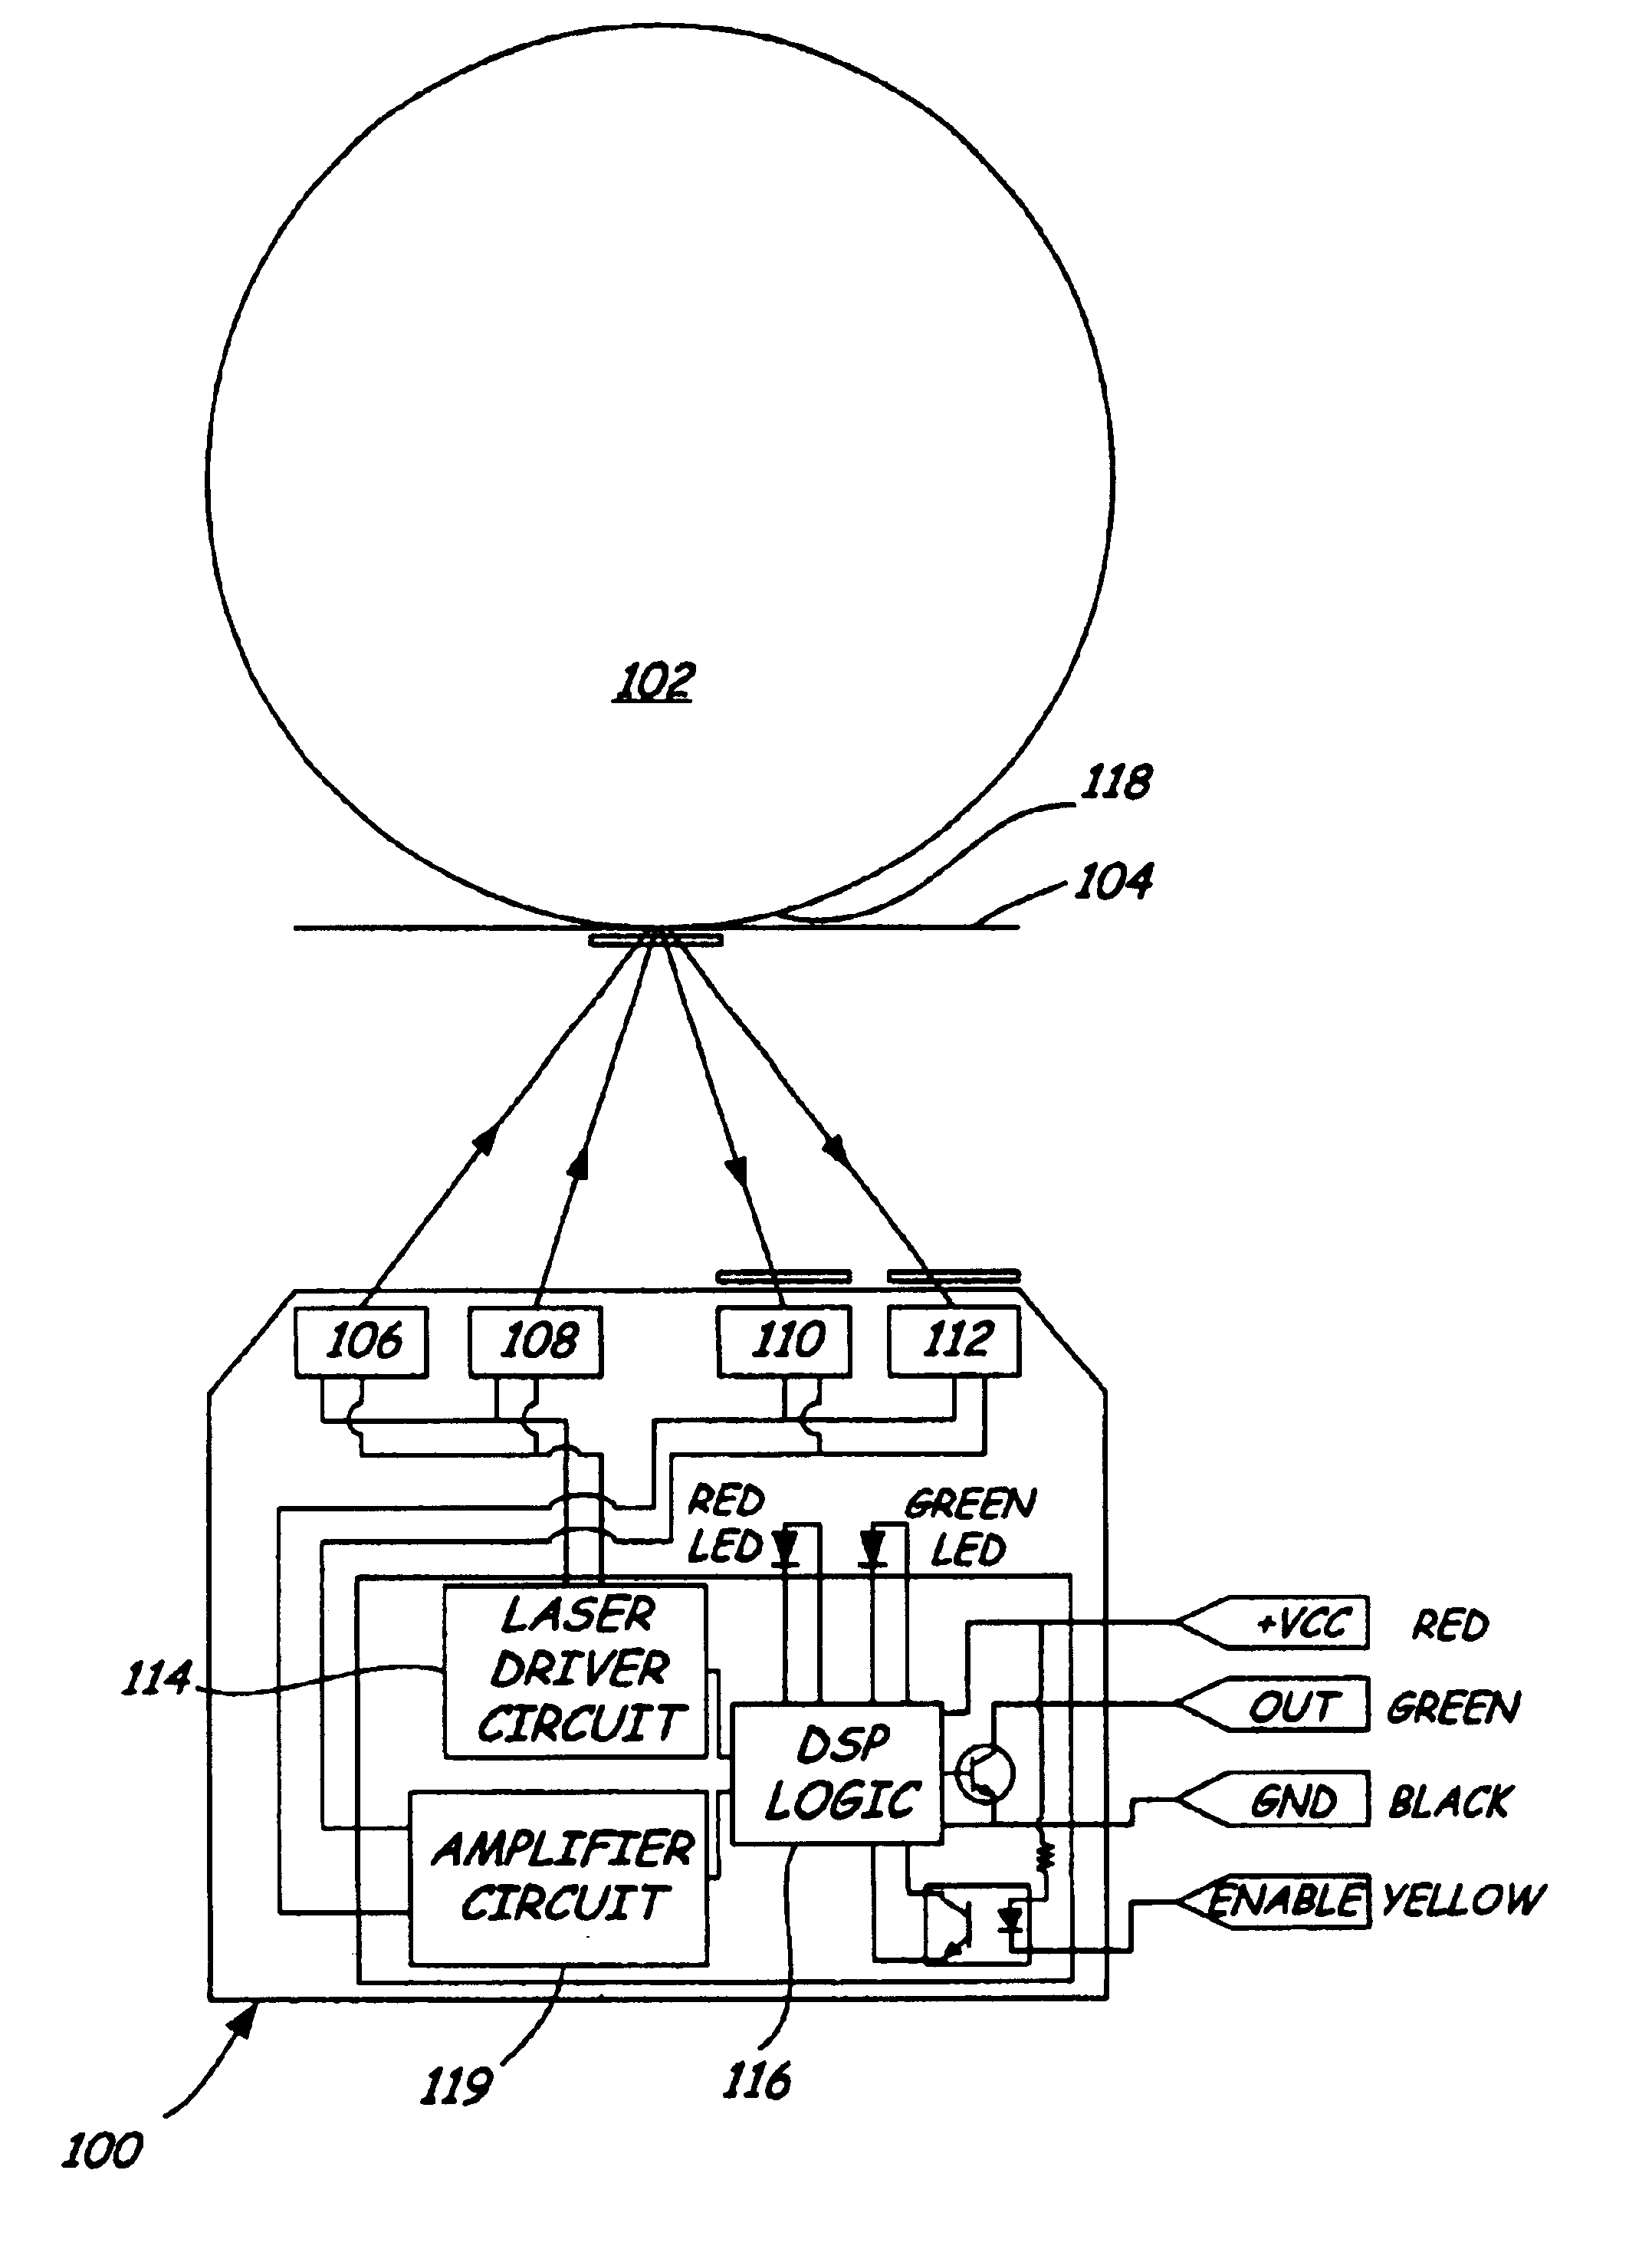 Semiconductor wafer carrier mapping sensor